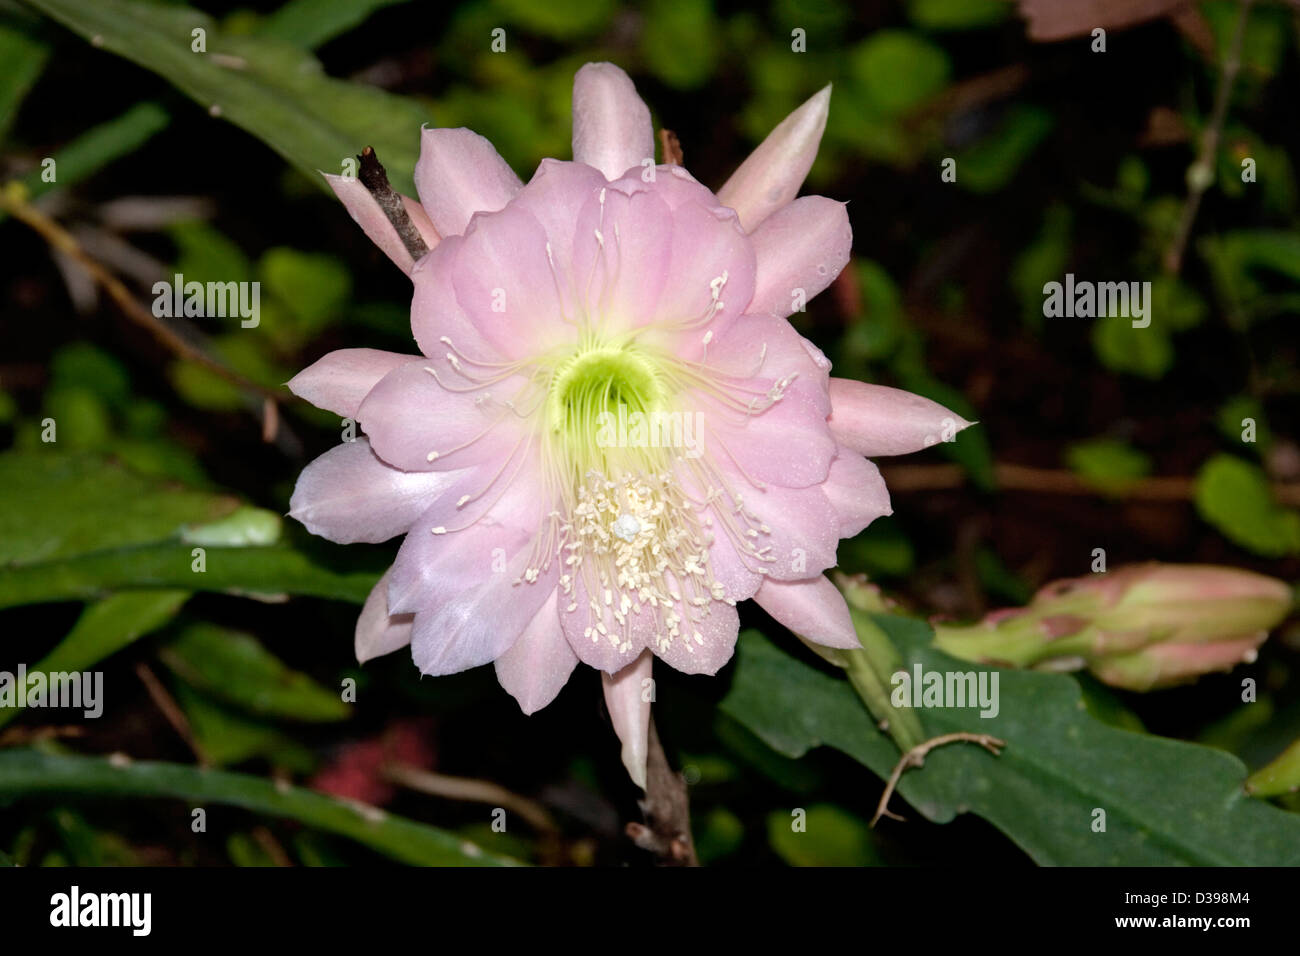 Pale pink flower, bud and flat green stems of Epiphyllum cactus - orchid / Christmas cactus Stock Photo